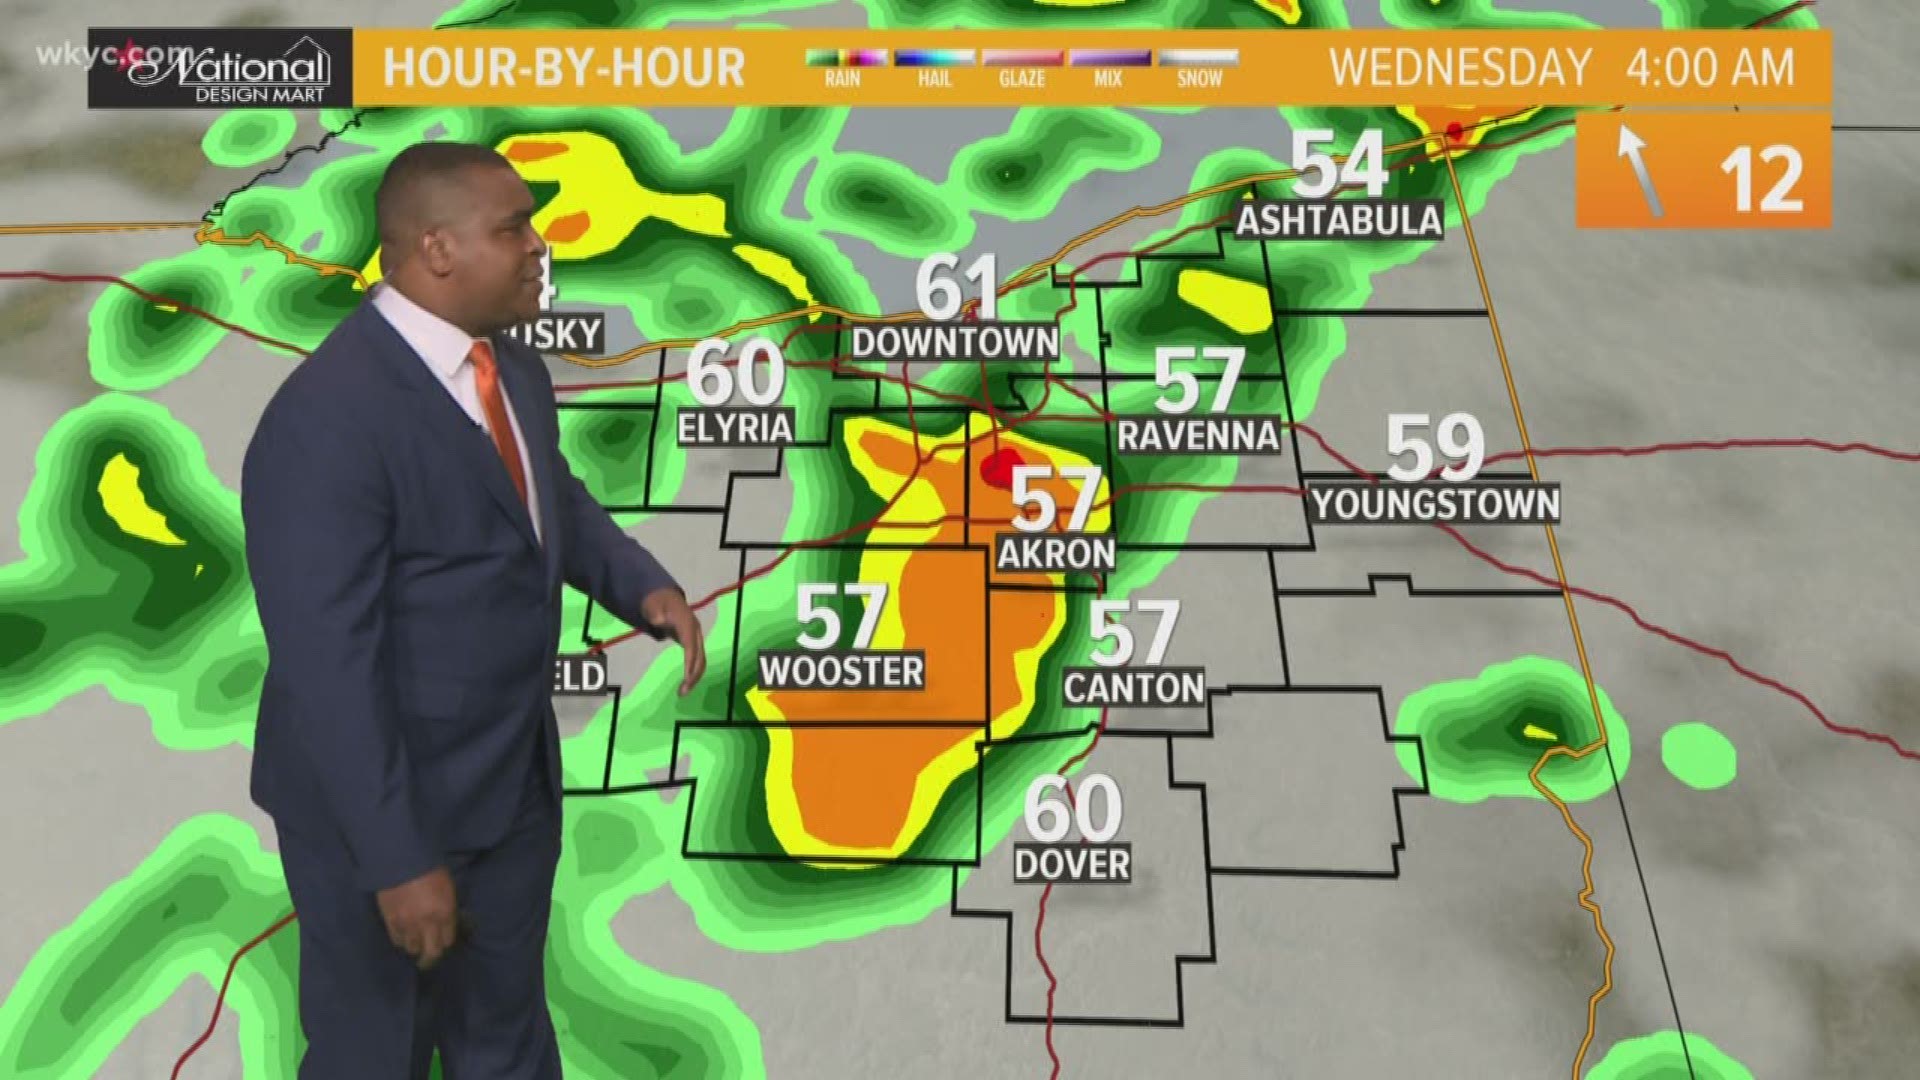 Afternoon weather forecast for Northeast Ohio: October 15, 2019 | wkyc.com